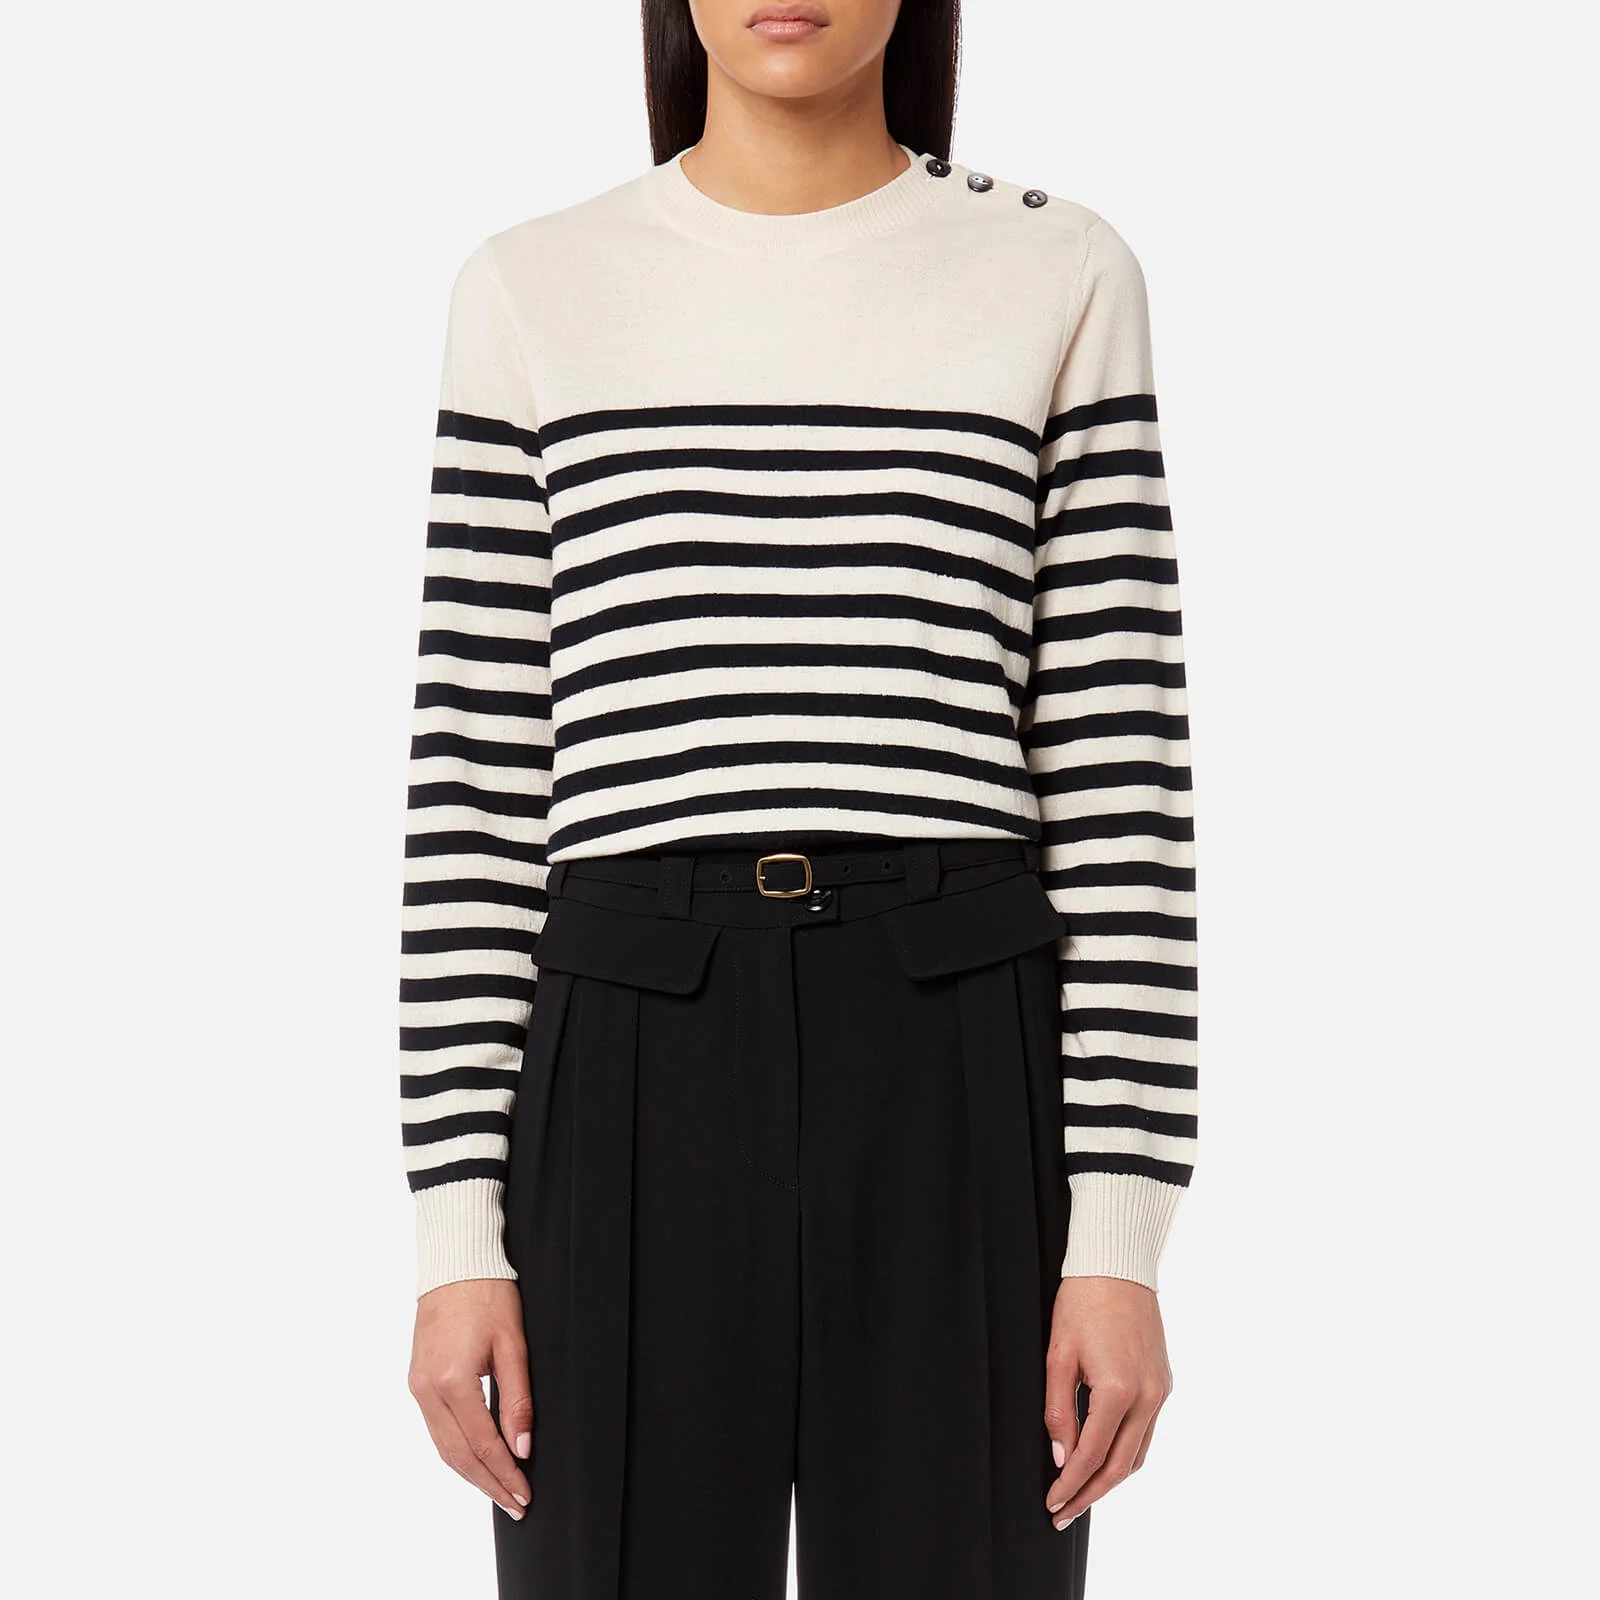 A.P.C. Women's Petra Jumper - Blue and White Image 1